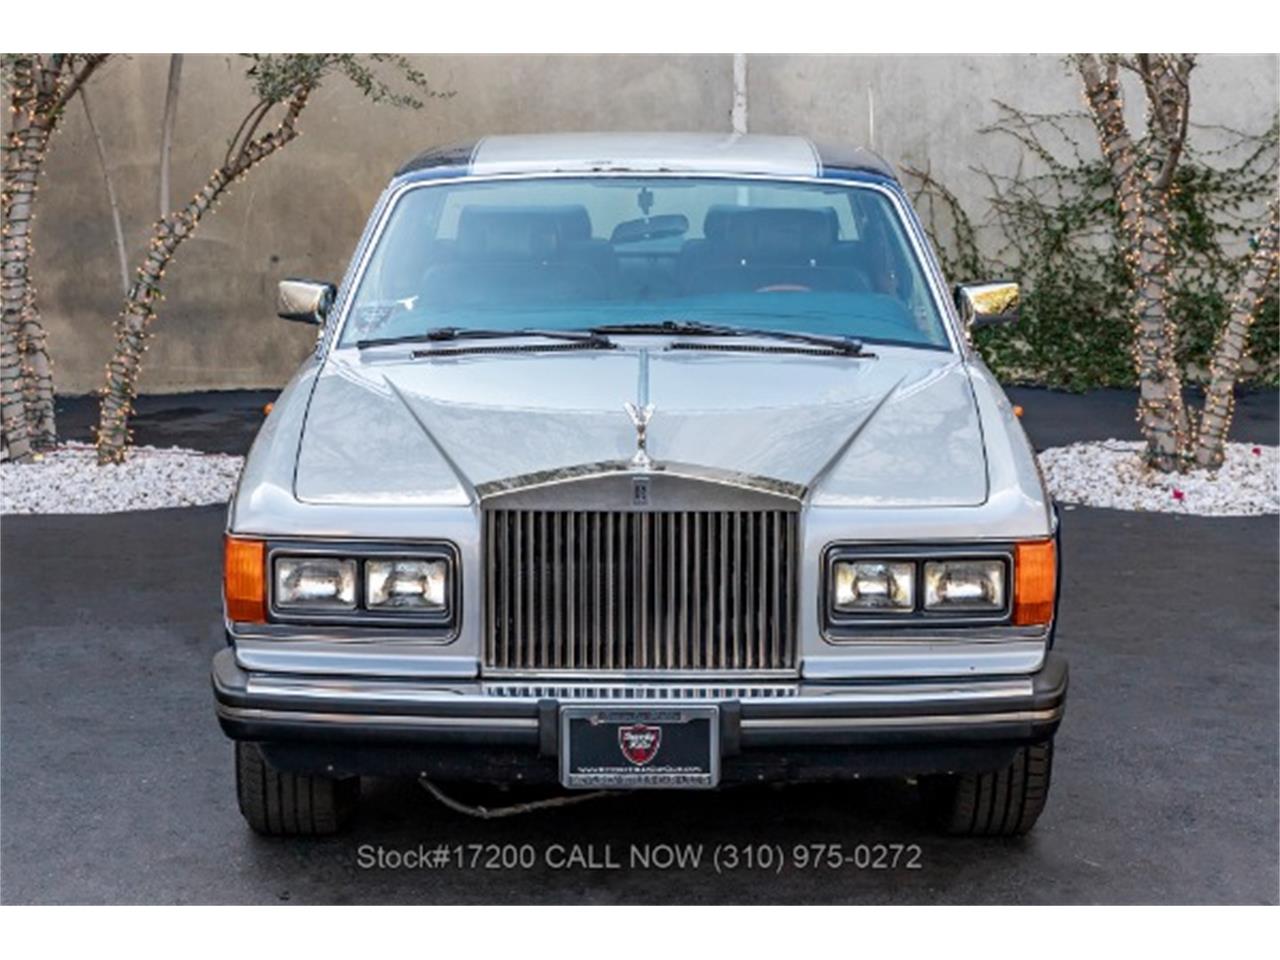 For Sale: 1987 Rolls-Royce Silver Spur in Beverly Hills, California for sale in Beverly Hills, CA